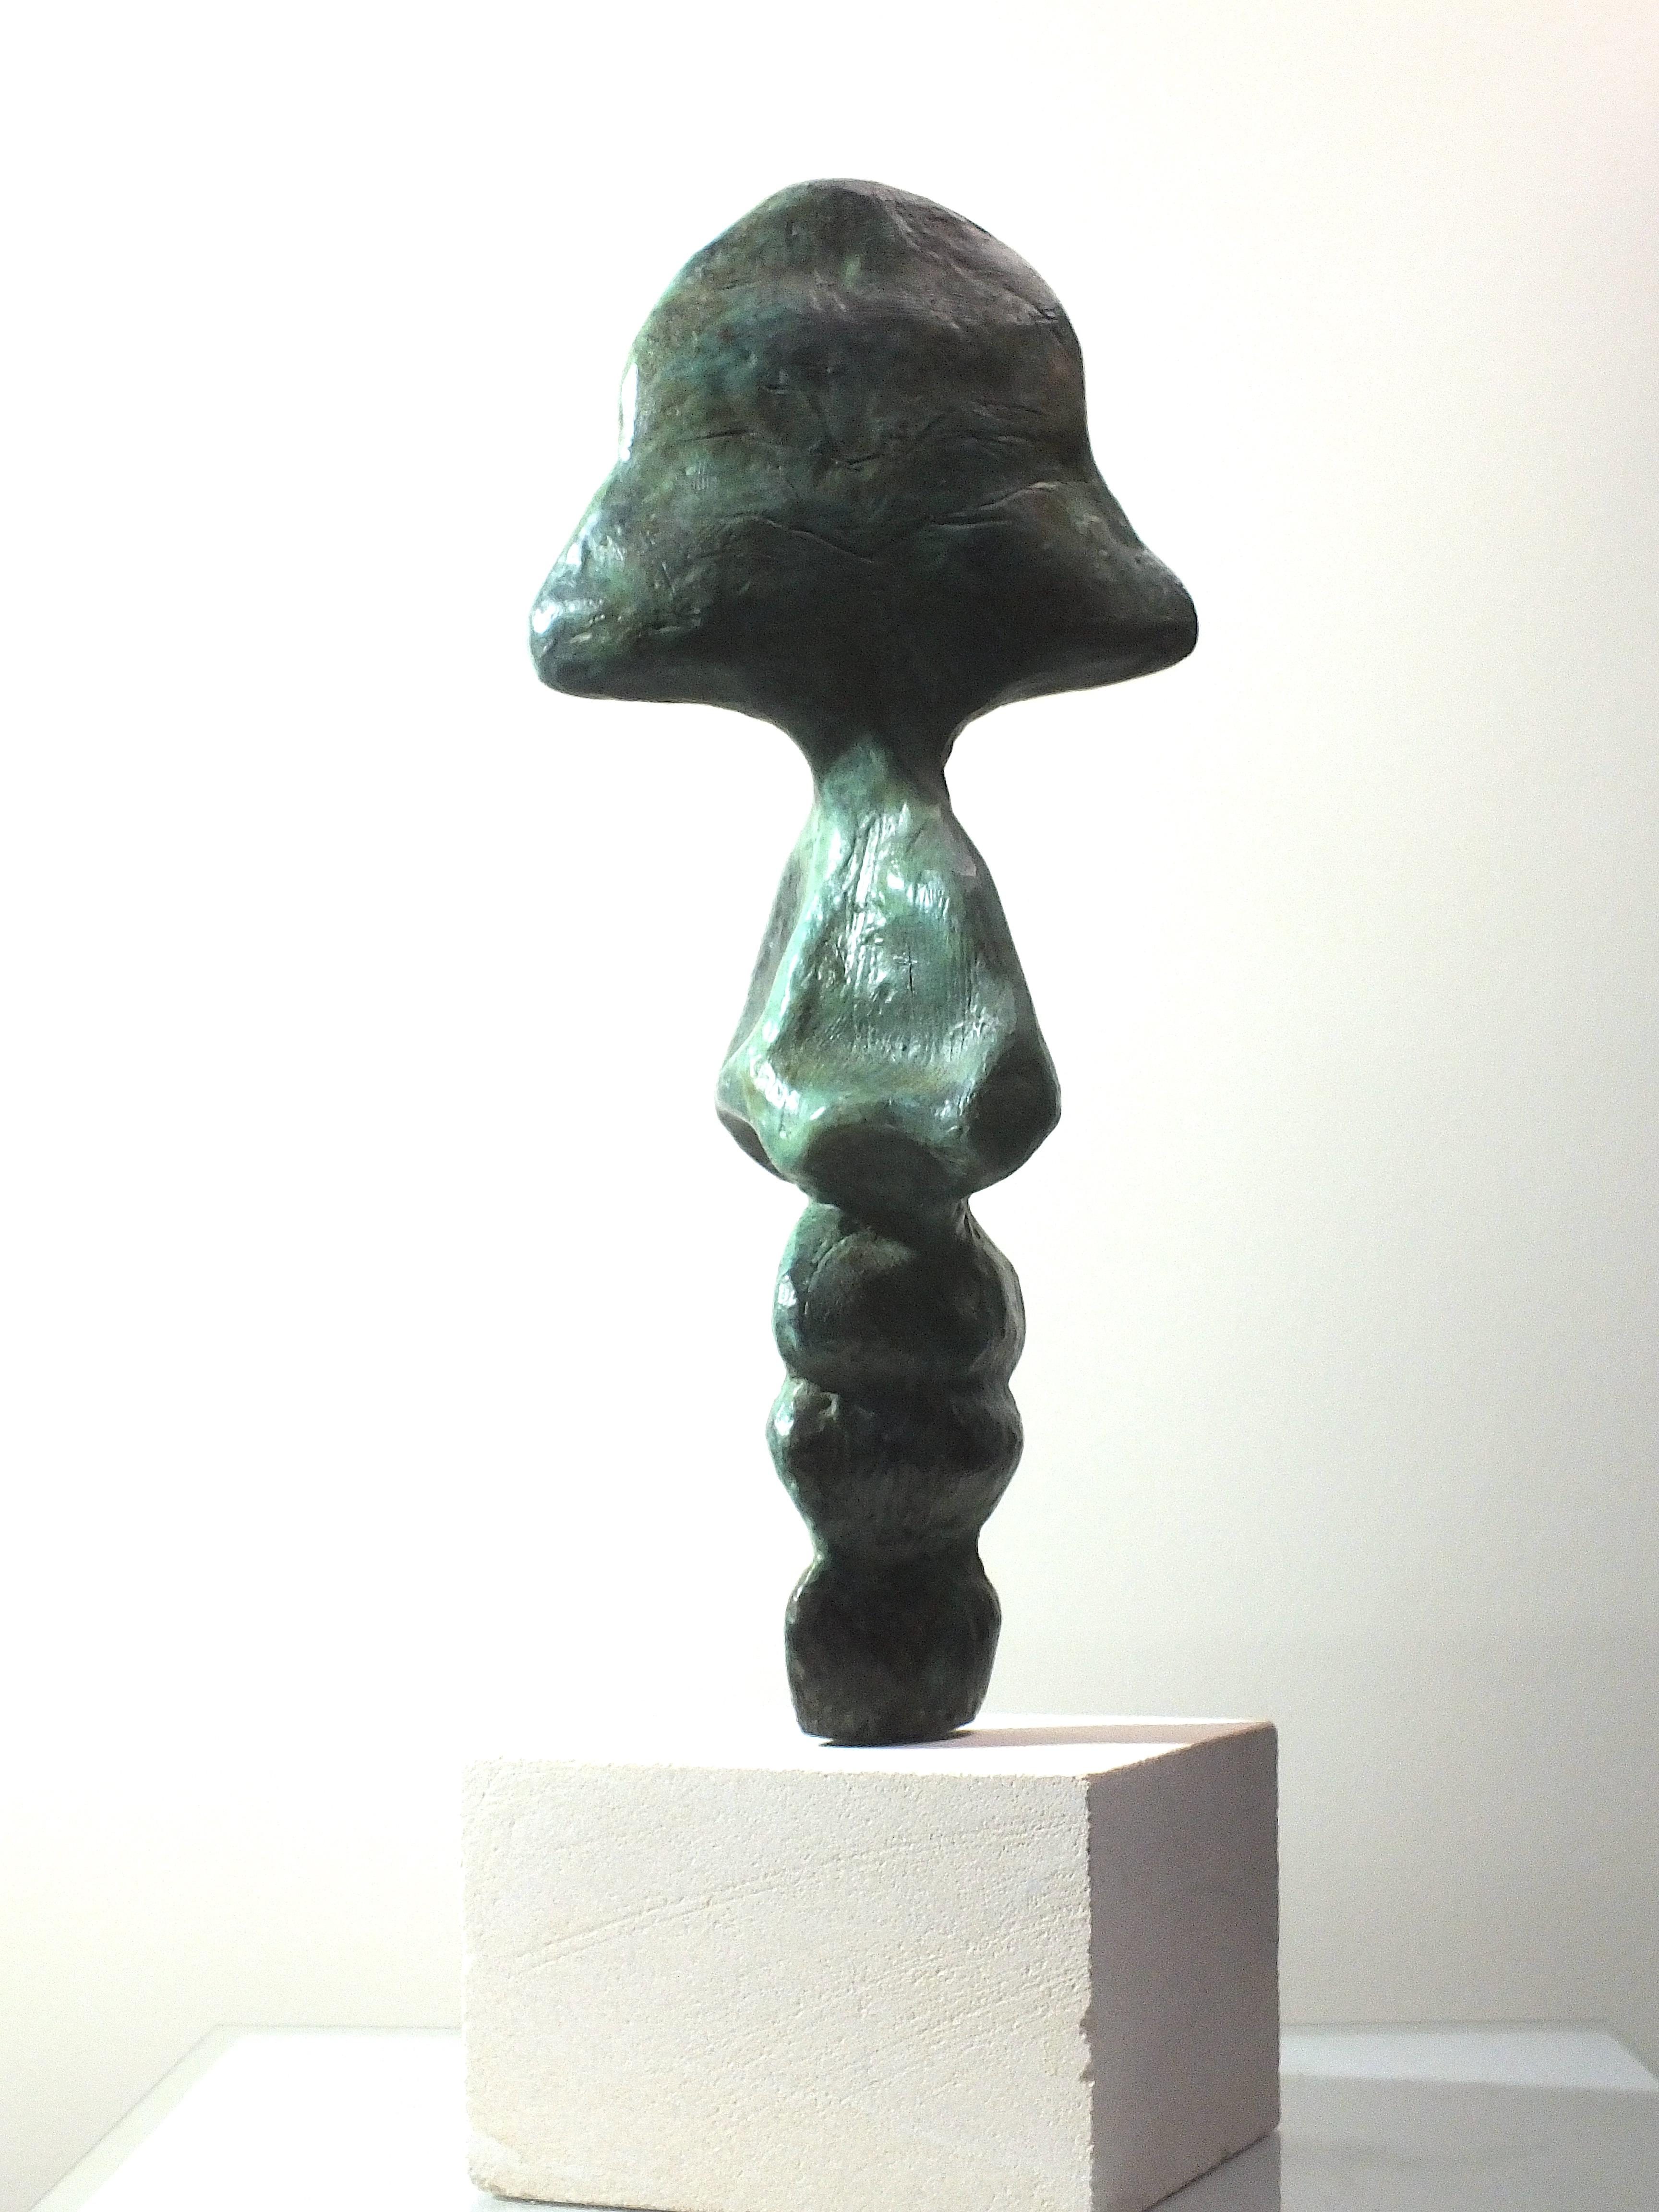 Tim Rawlin is a contemplative artist who explores the idea of self & identity. In this piece it's almost as if the soul has been laid bare allowing one to speculate about who we are. It's a reflective and tactile sculpture. This bronze is number 3